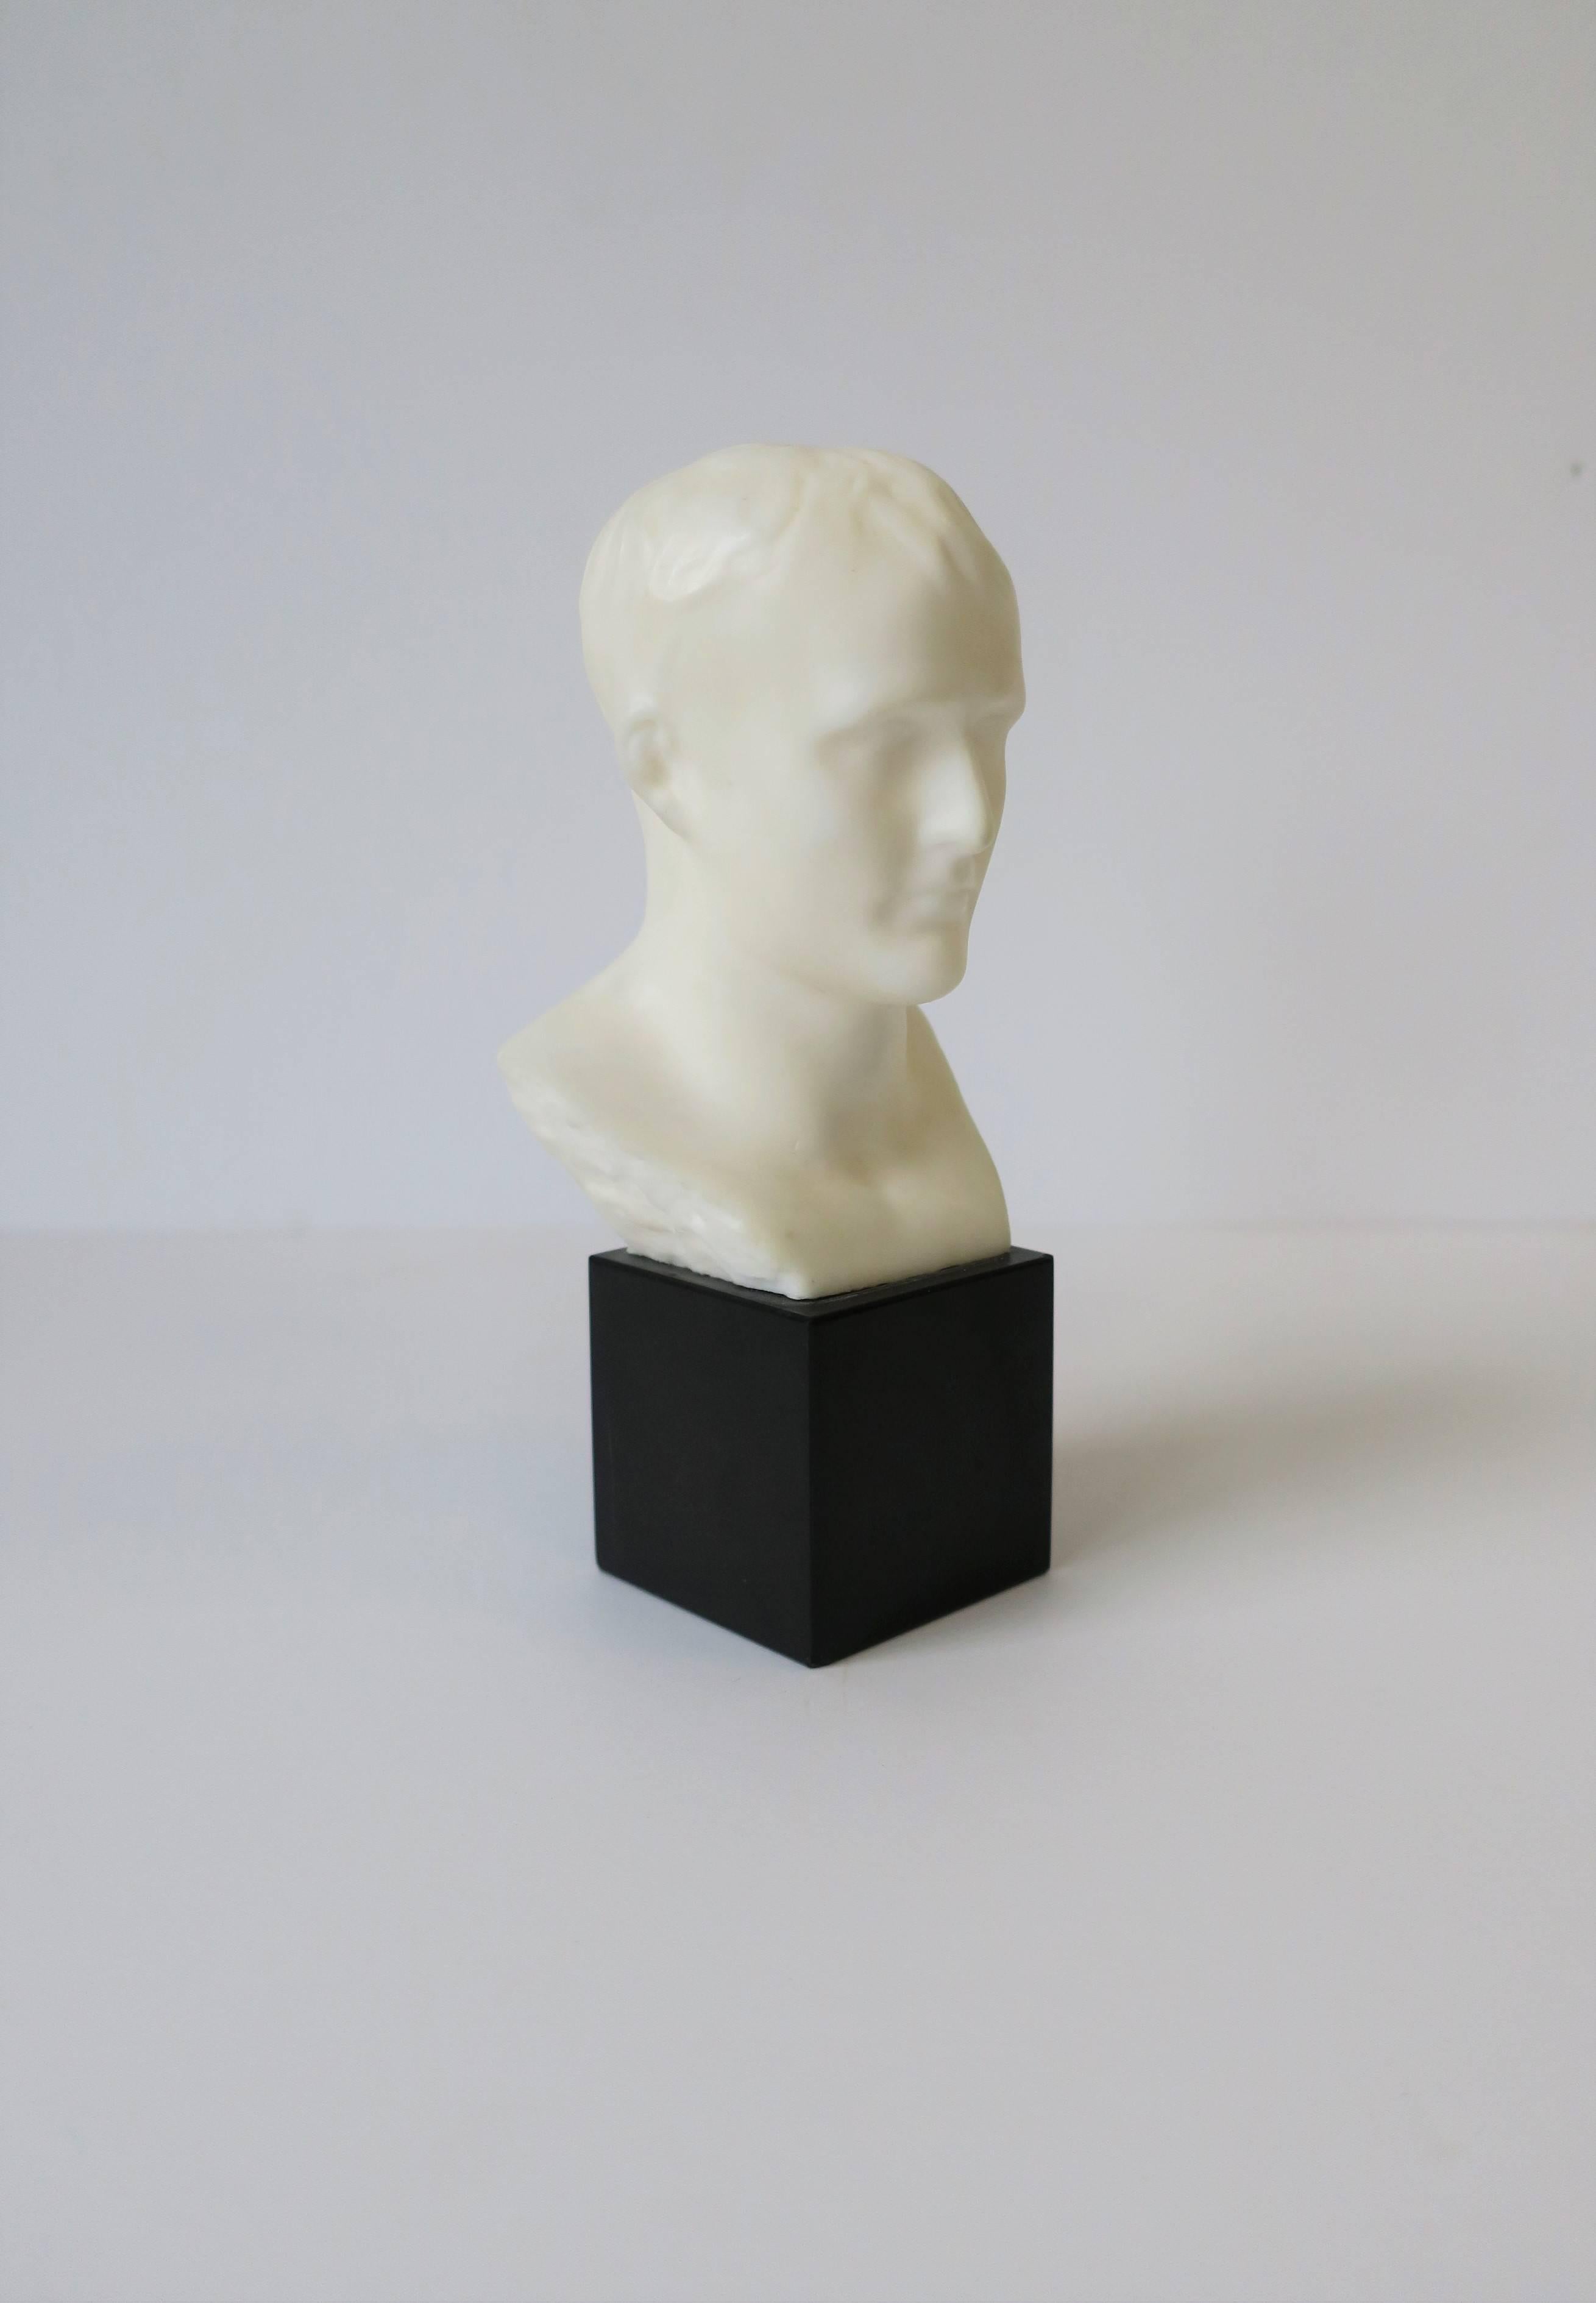 A vintage white resin male bust sculpture on a square black marble base. 

Sculpture measures: 2.5